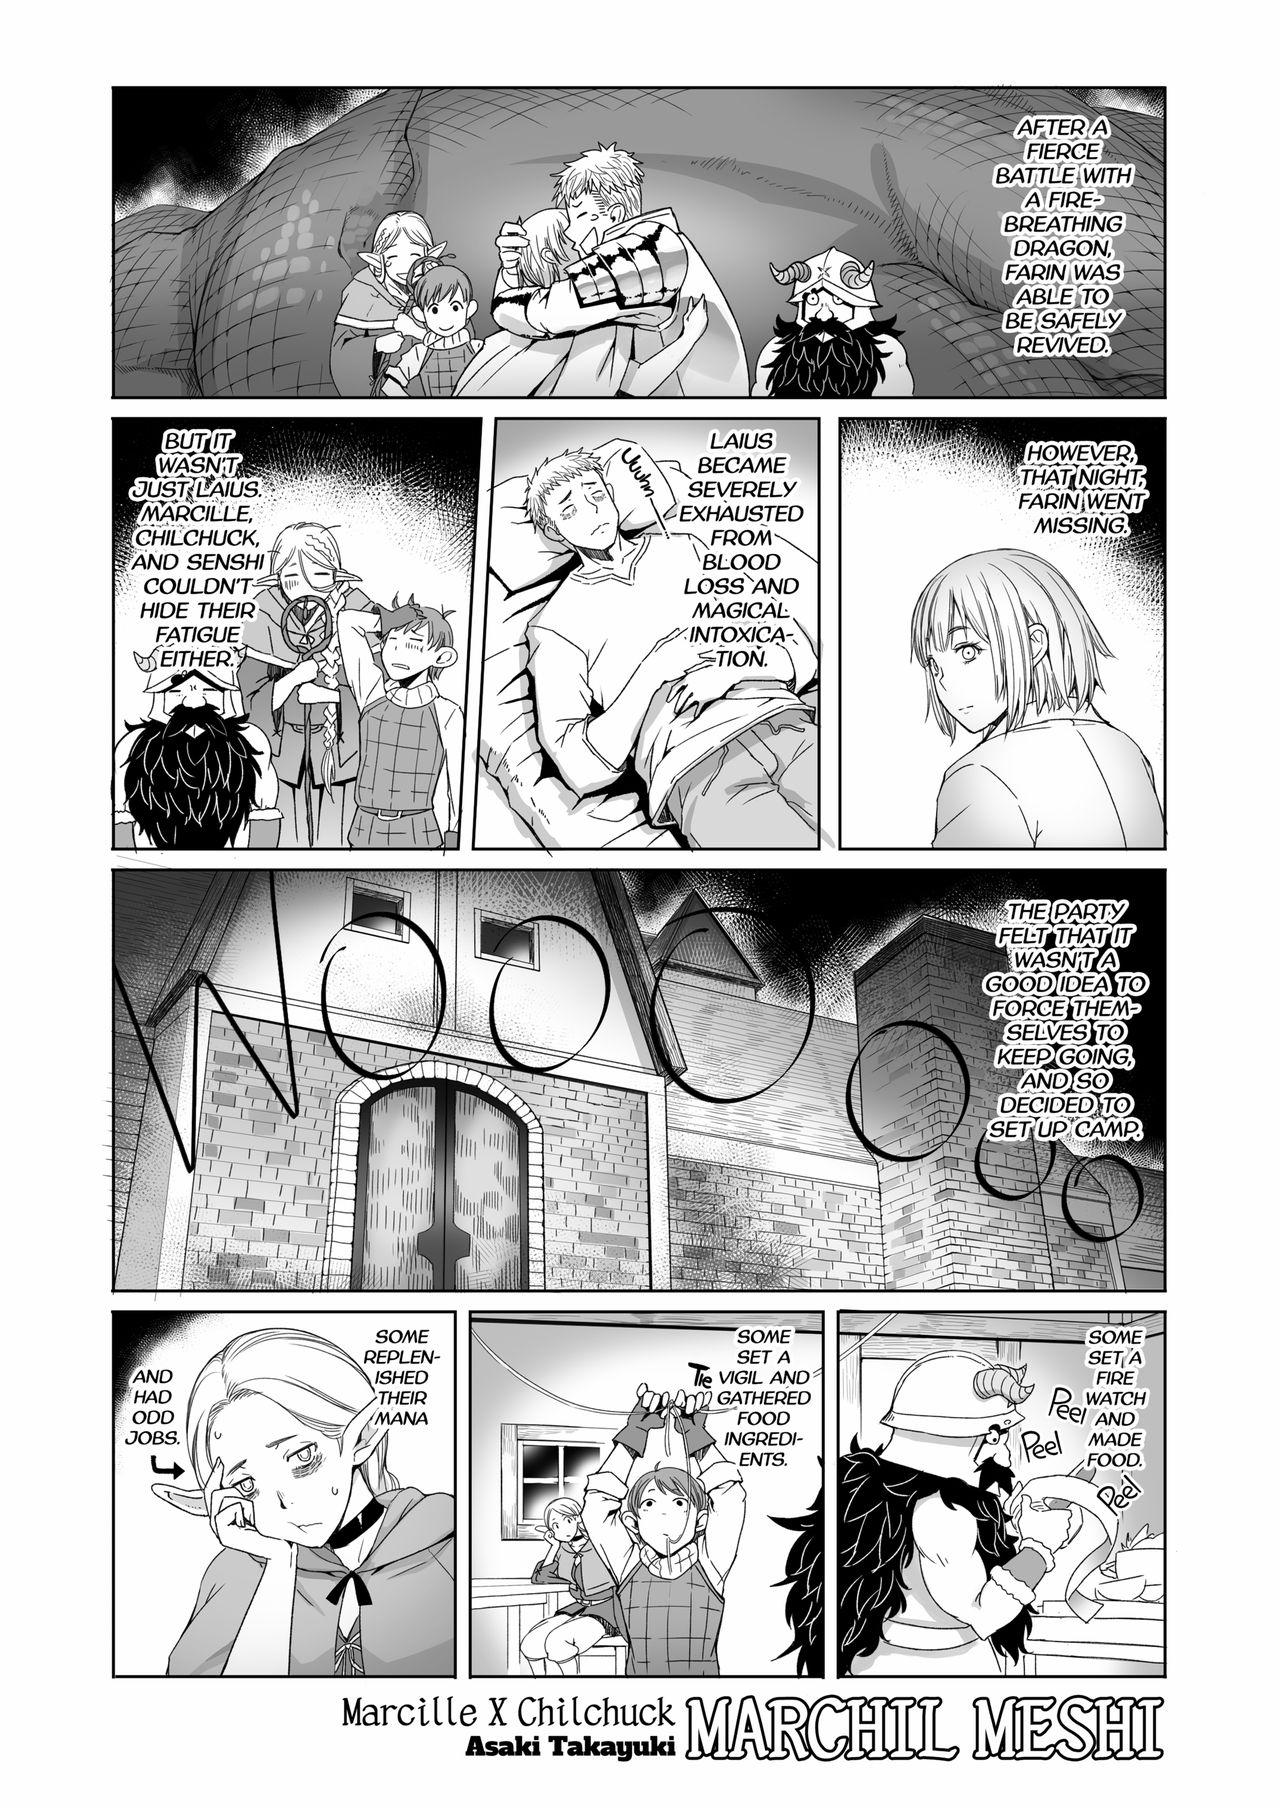 Hot Girl Marchil Meshi - Dungeon meshi Oldvsyoung - Page 2